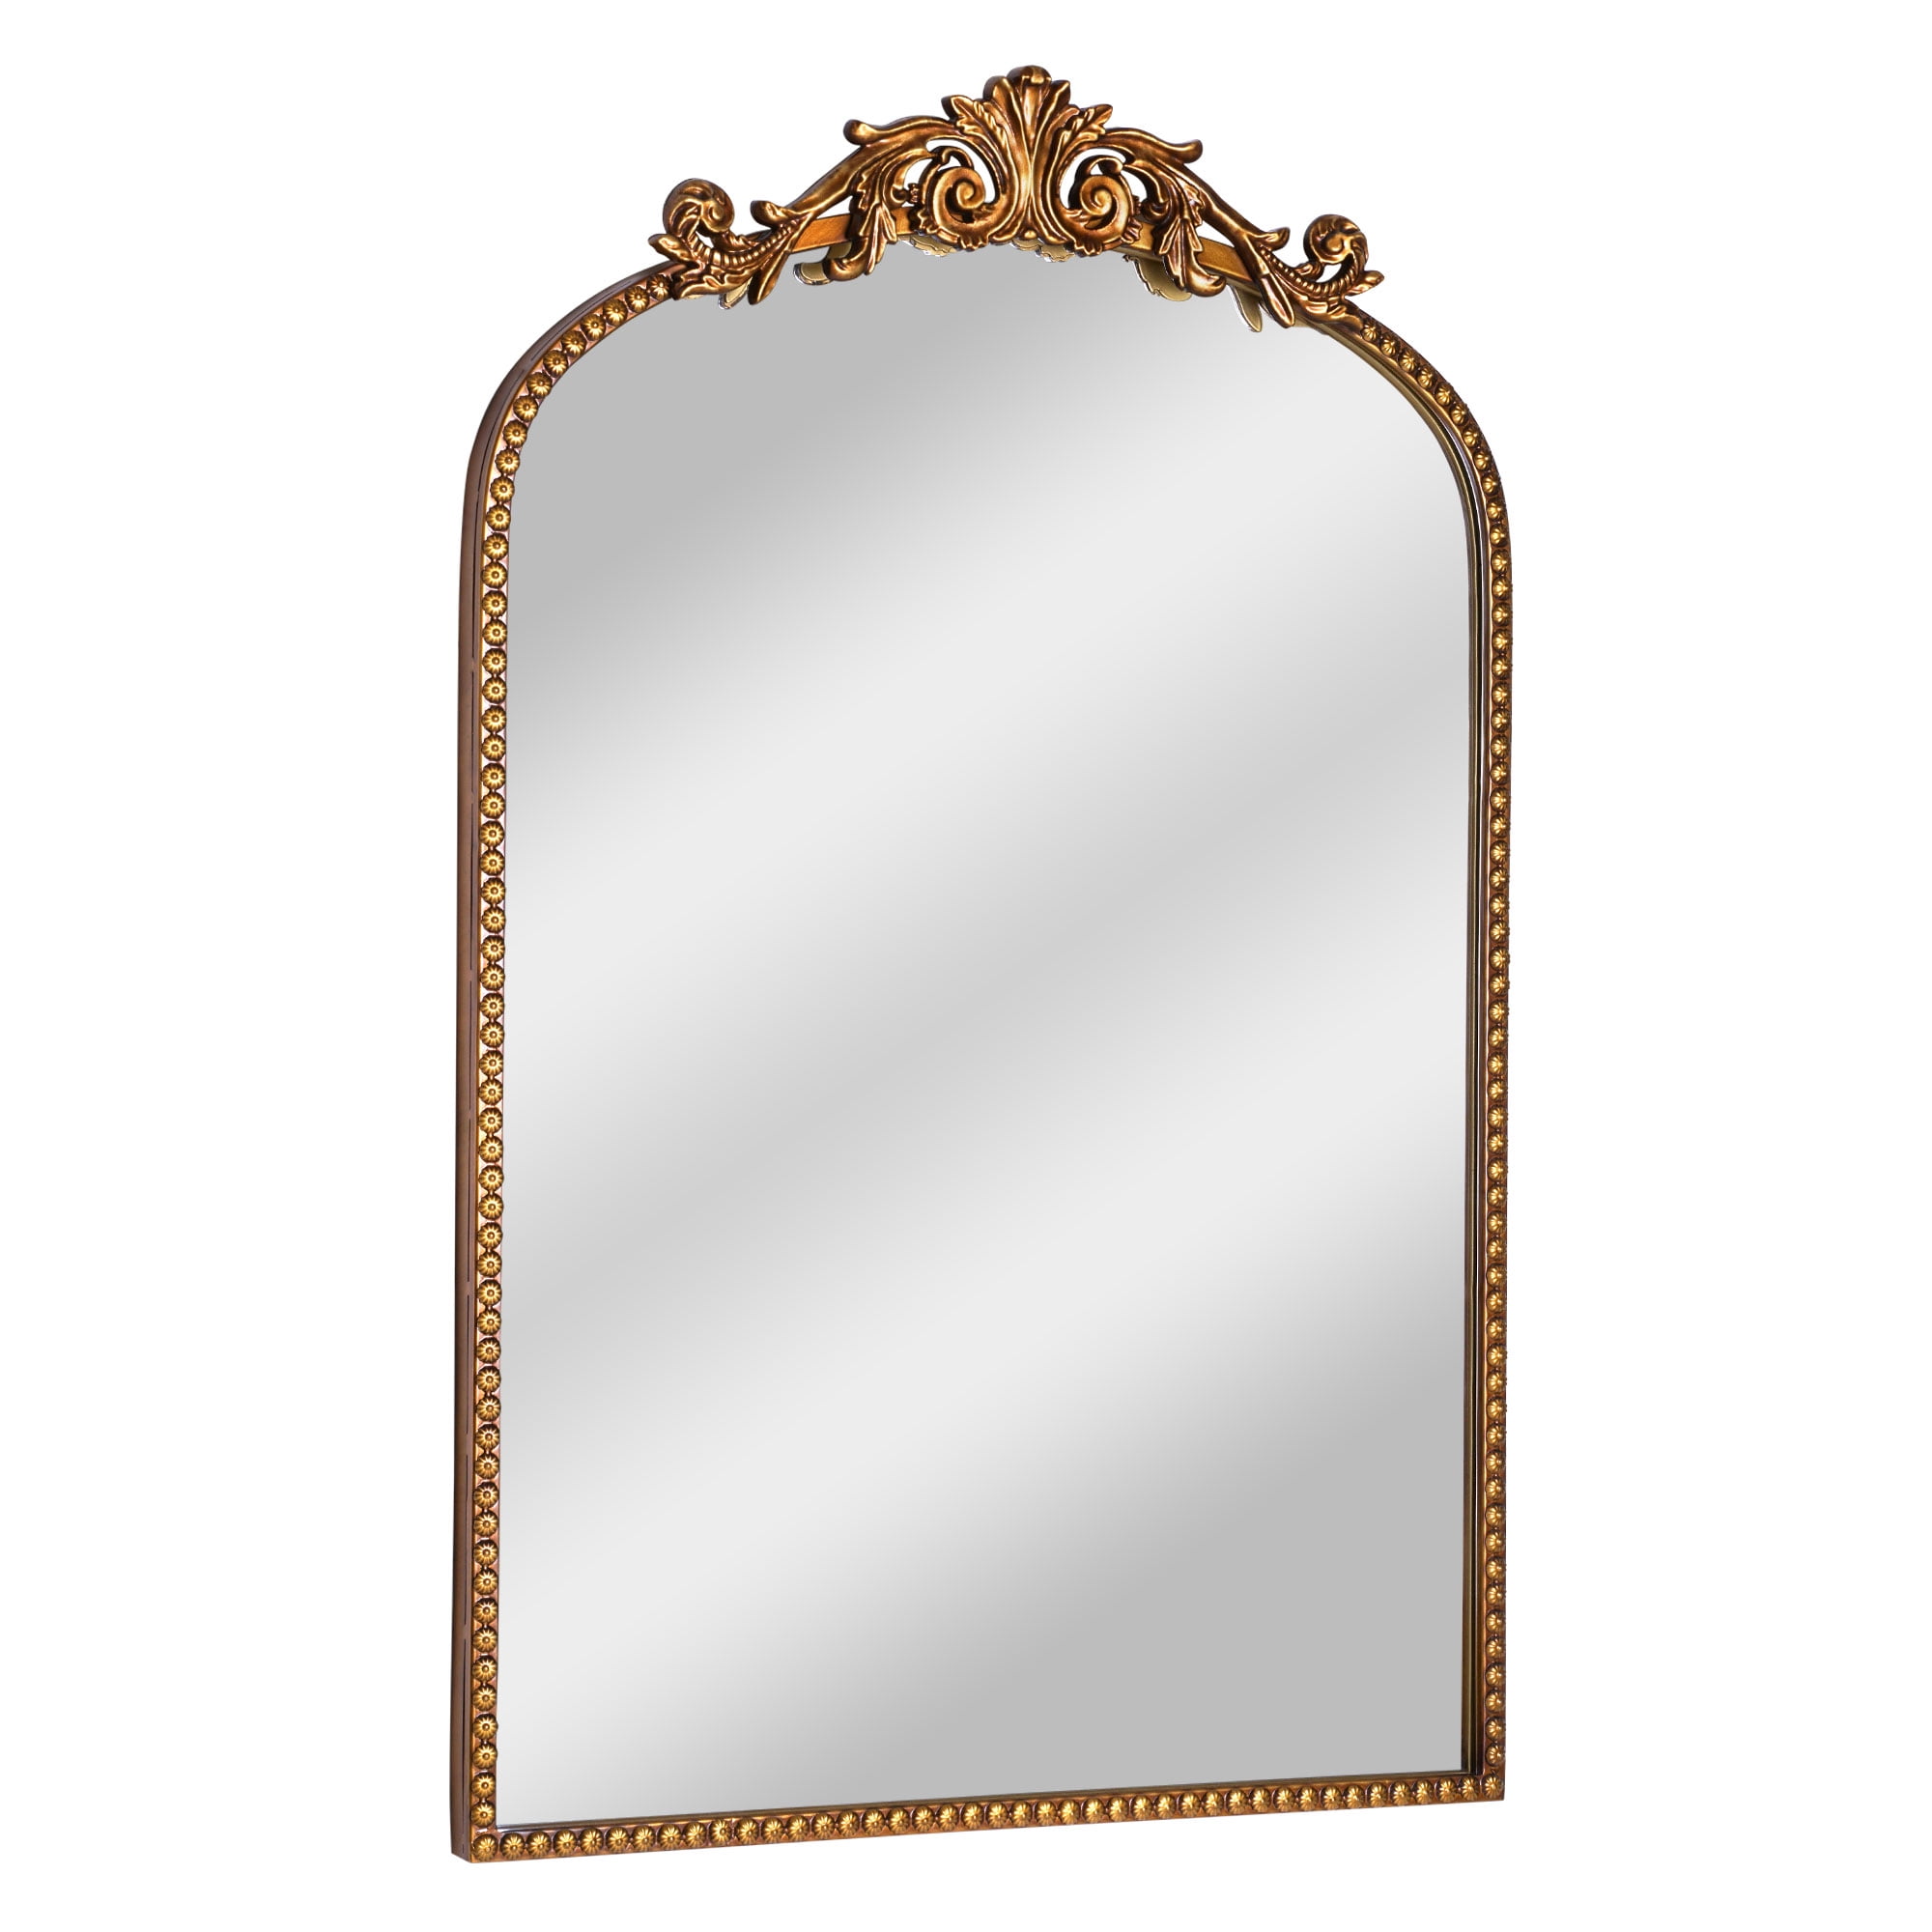 20" x 30" Better Homes & Gardens Gold Filigree Arch Metal Wall Mirror $55 + Free Shipping